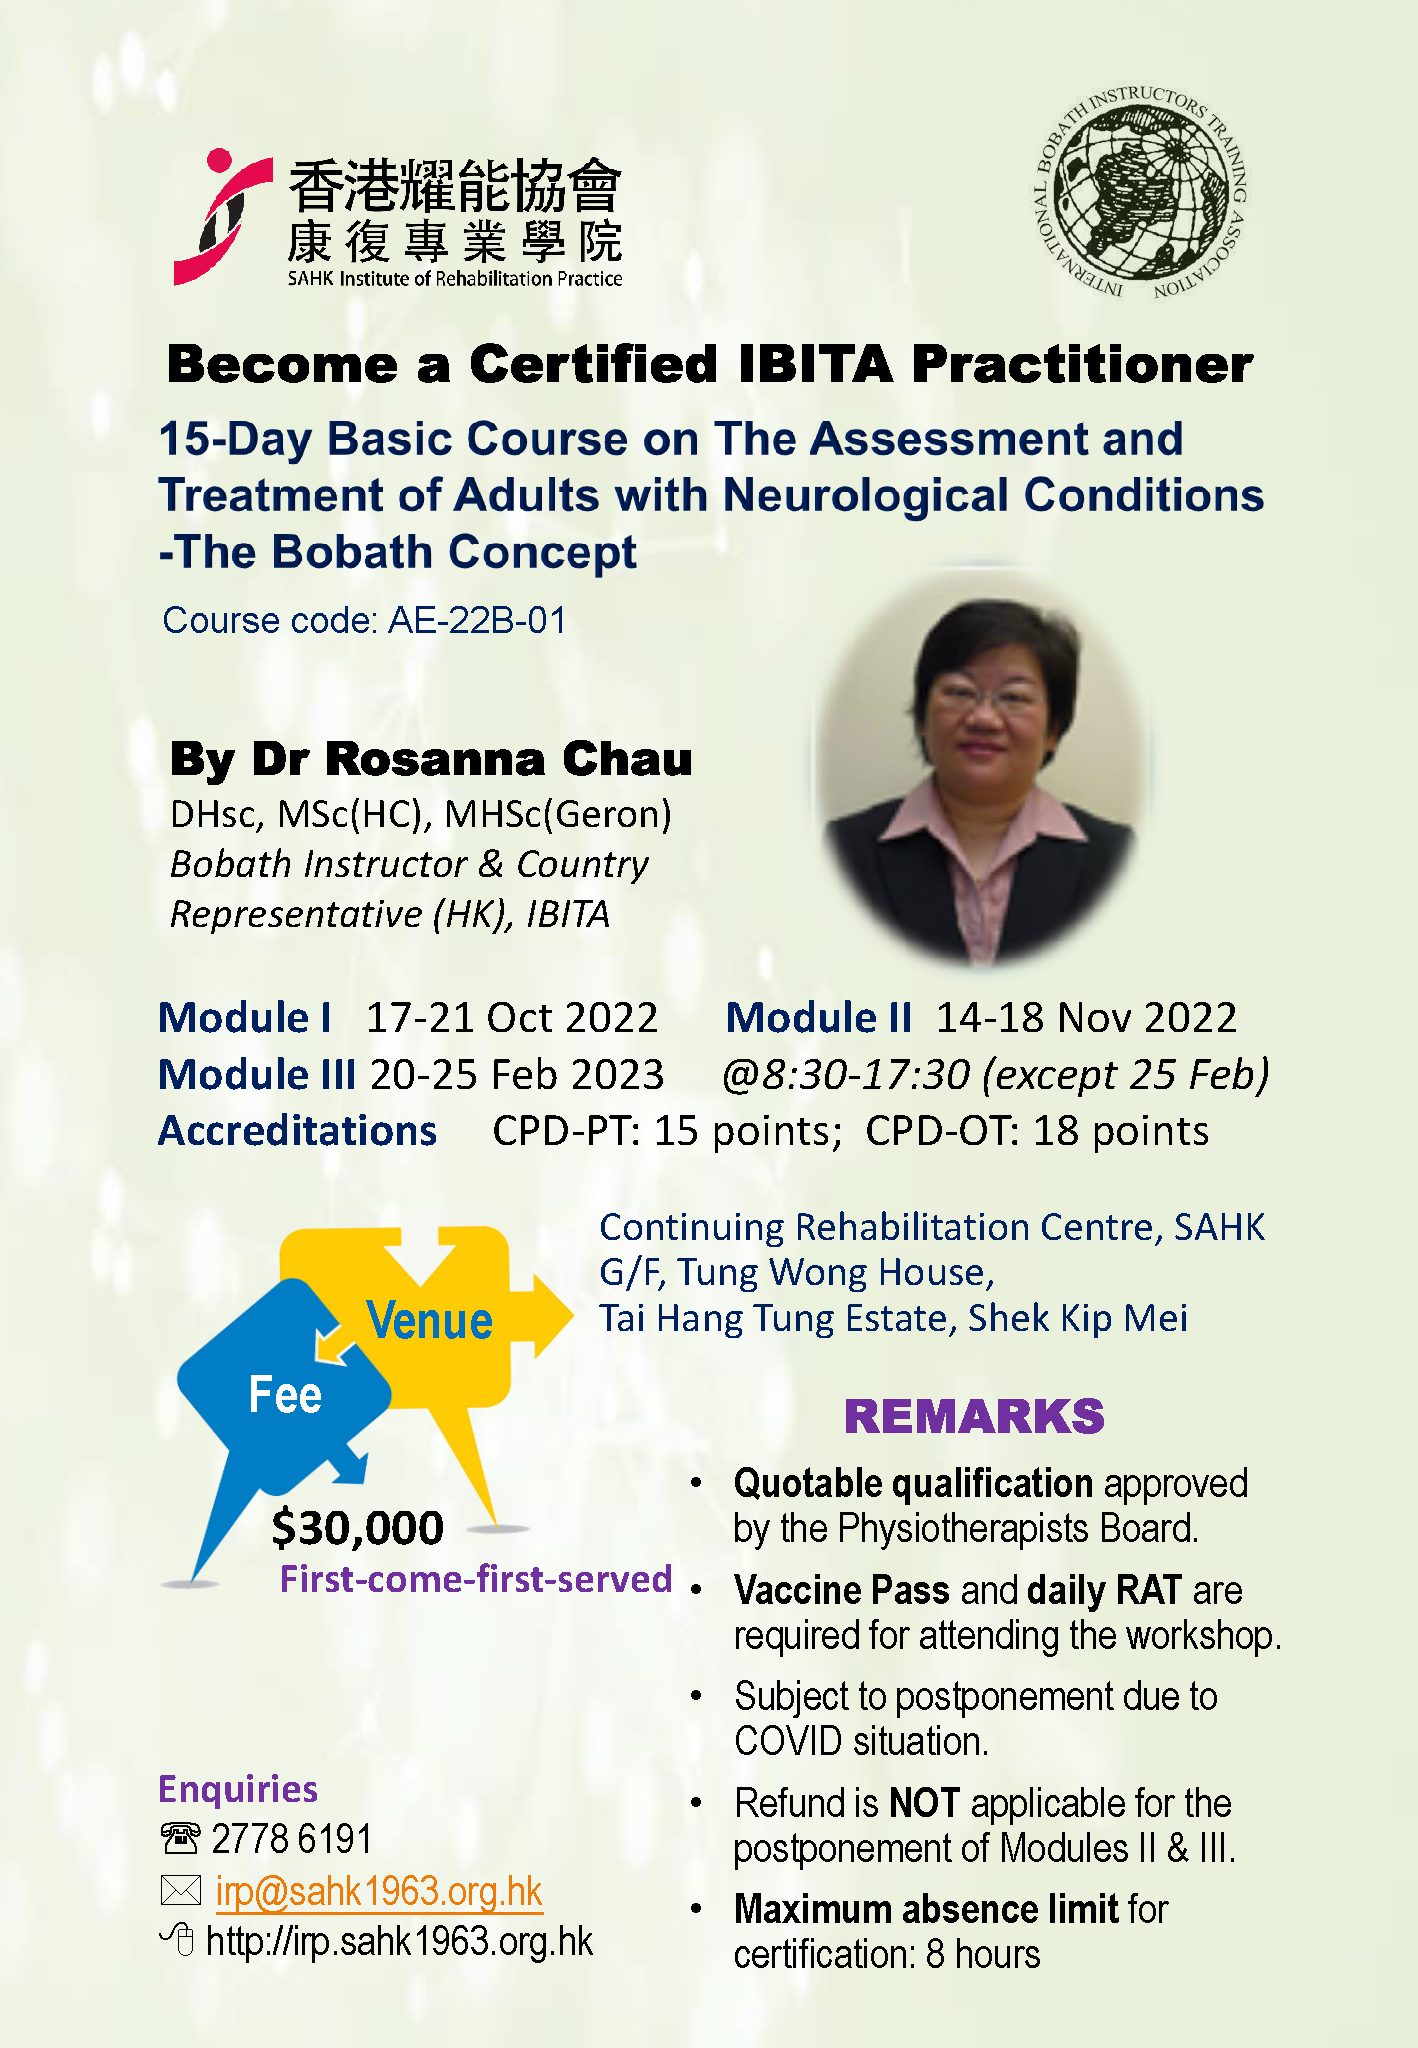 15
Day Basic Course on The Assessment and Treatment of
Adults with Neurological Conditions The Bobath Concept